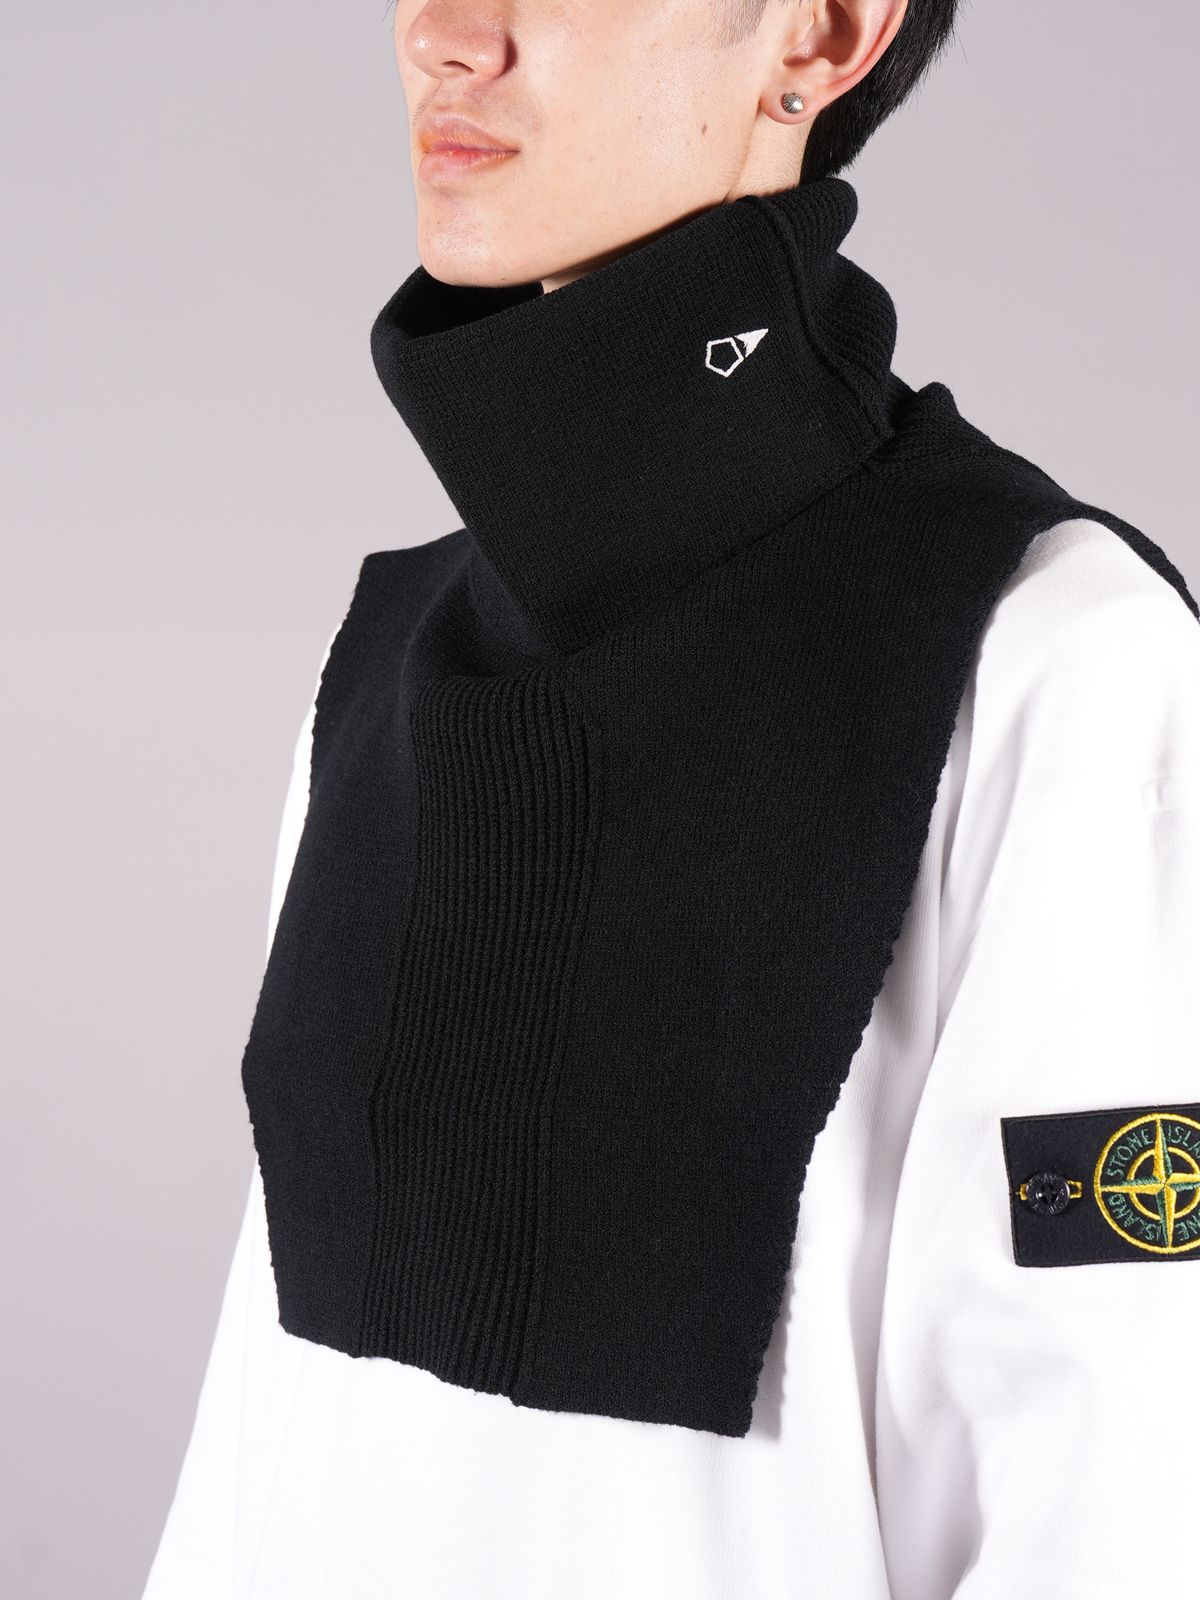 STONE ISLAND SHADOW PROJECT - N012V NECK/FRONT WARMER_CHAPTER 2 